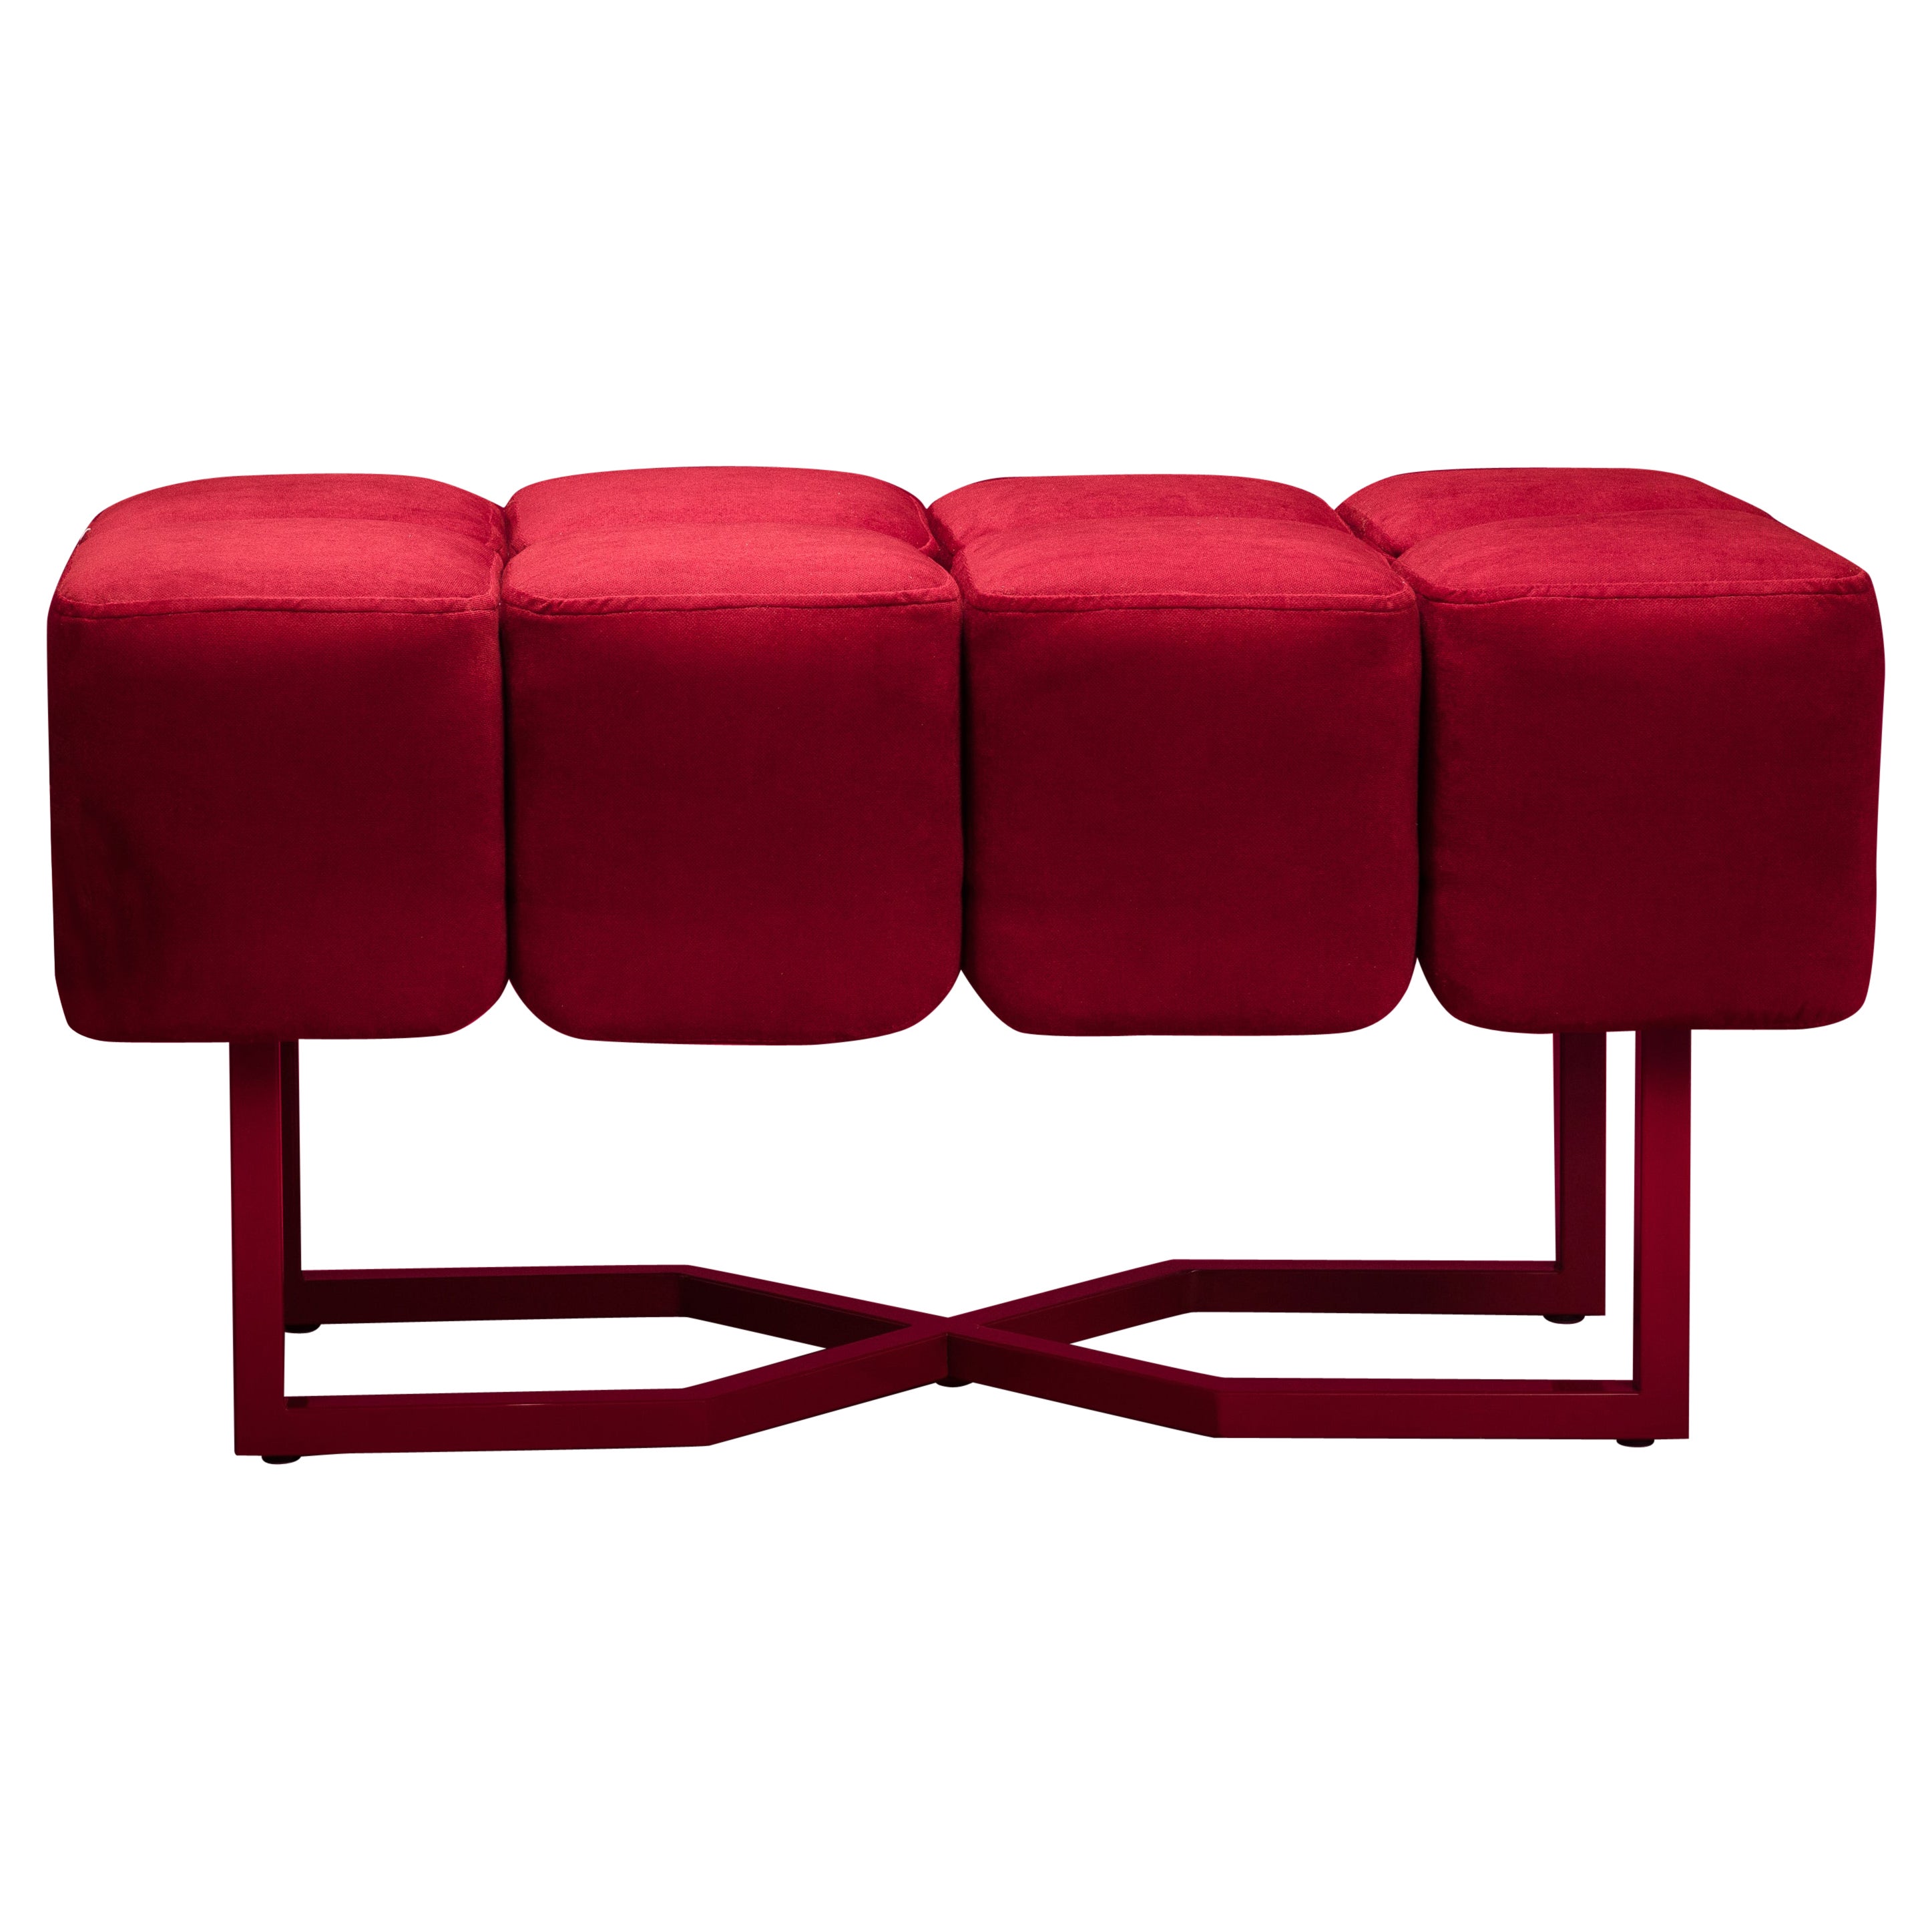 Puffy Stool M by Phormy